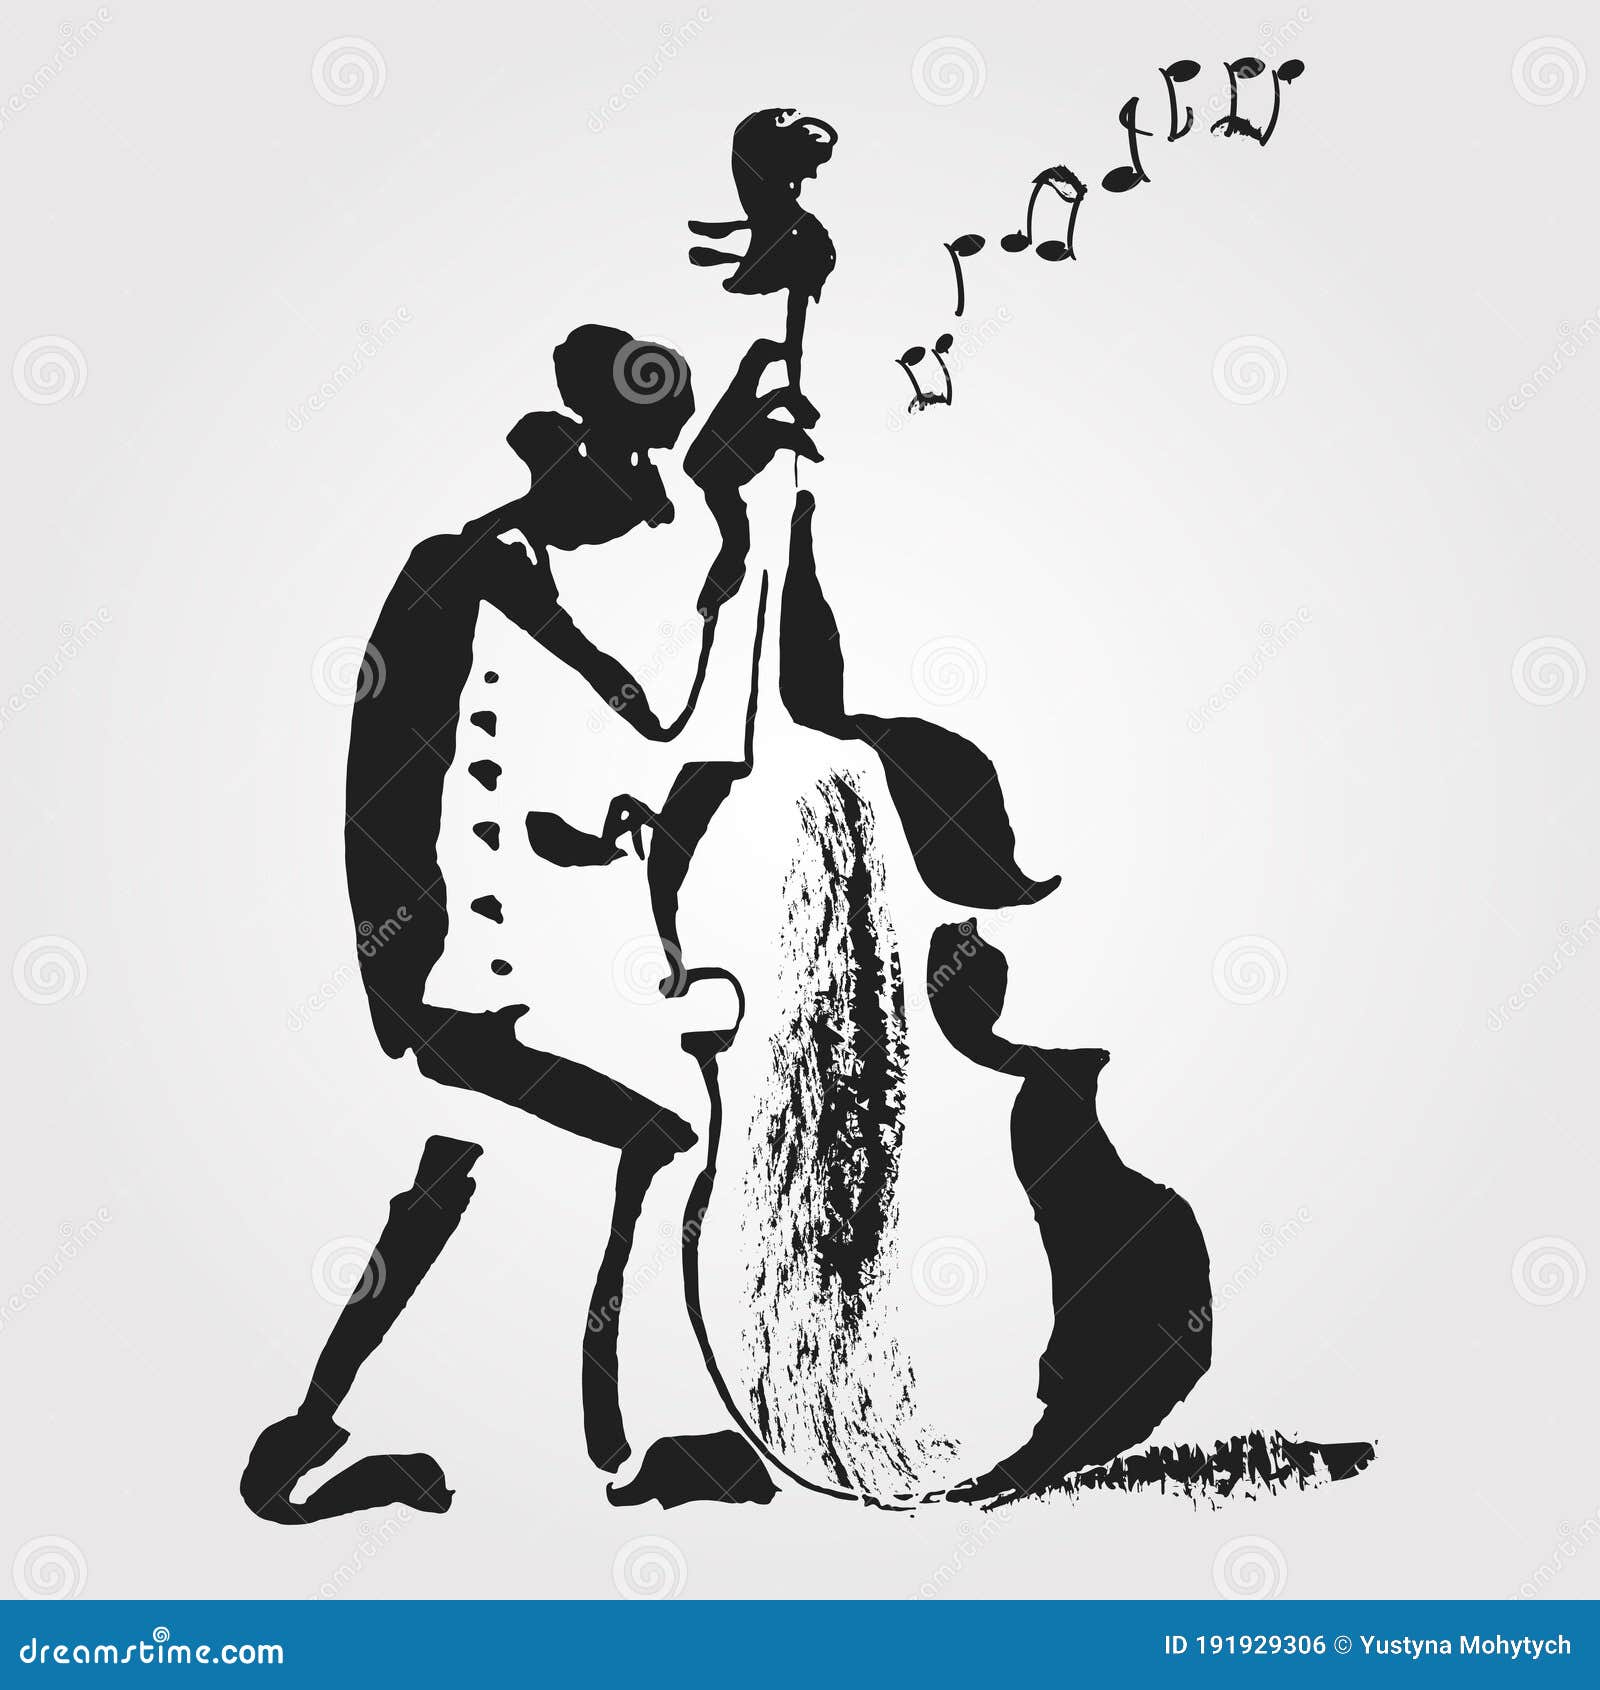 Ambesonne Jazz Music Decor Collection, Sketch Style of a Jazz Band Playing  Music with Instruments and Musical Notes Print, Polyester Fabric Bathroom  Shower Curtain Set with Hooks, Black White : Amazon.co.uk: Home